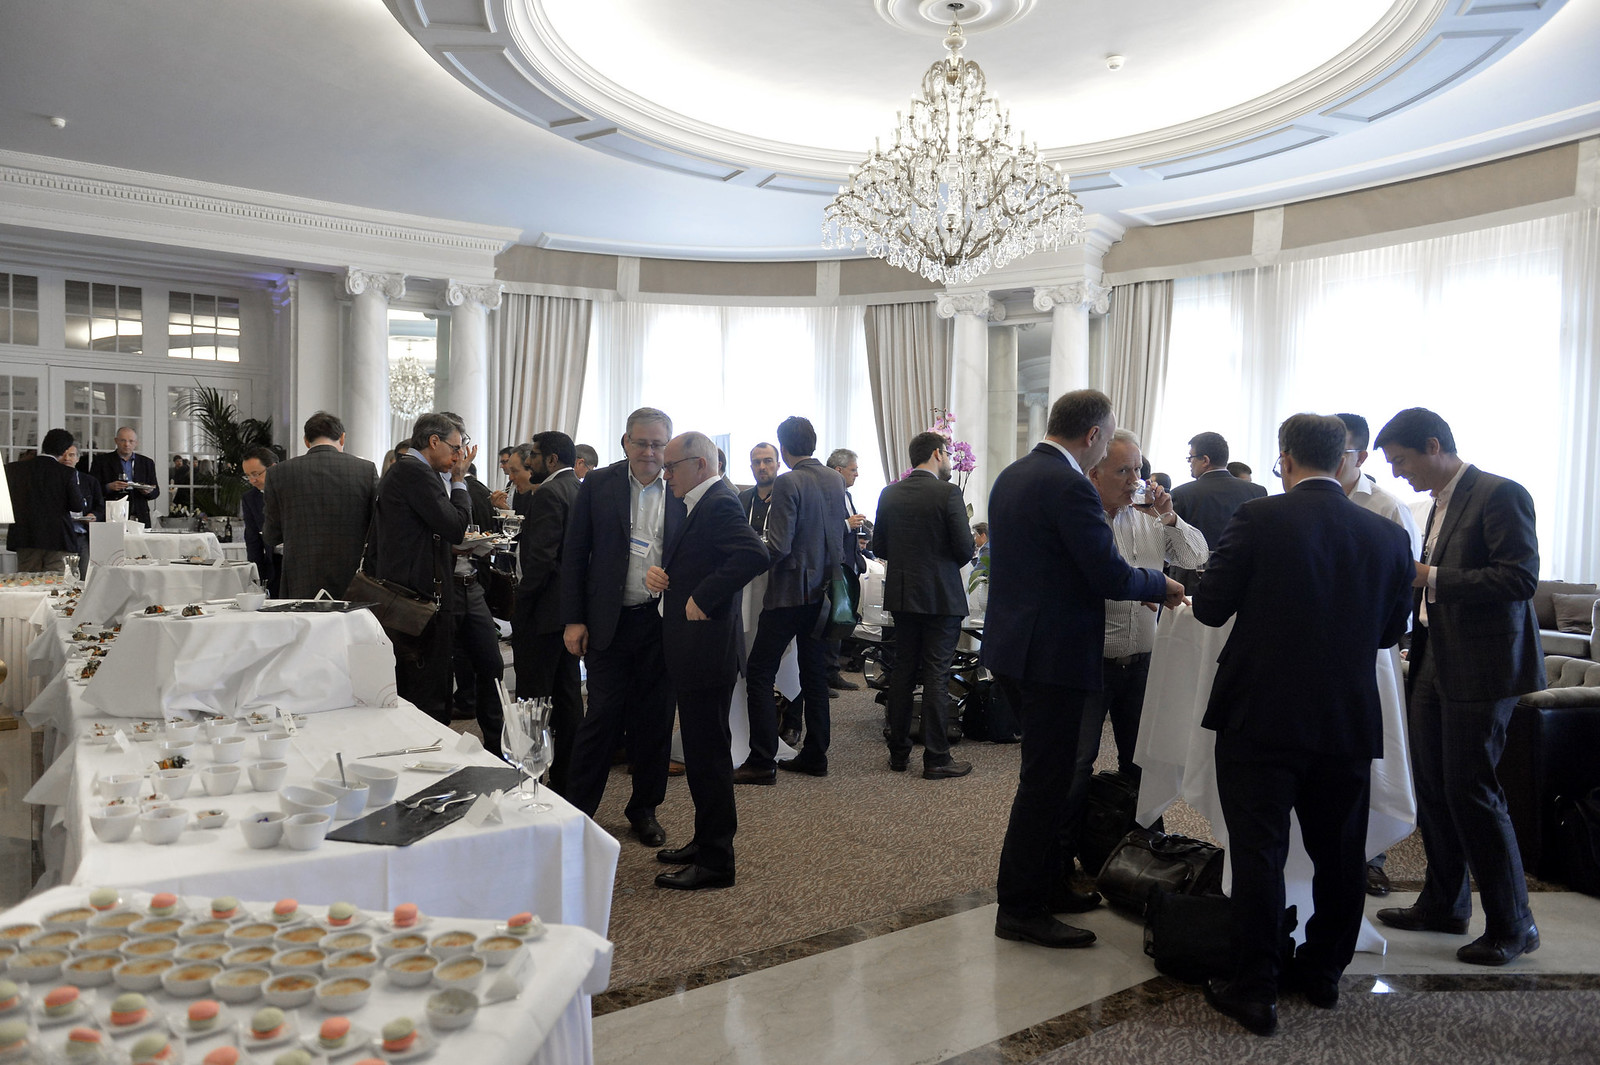 50 Networking Lunch